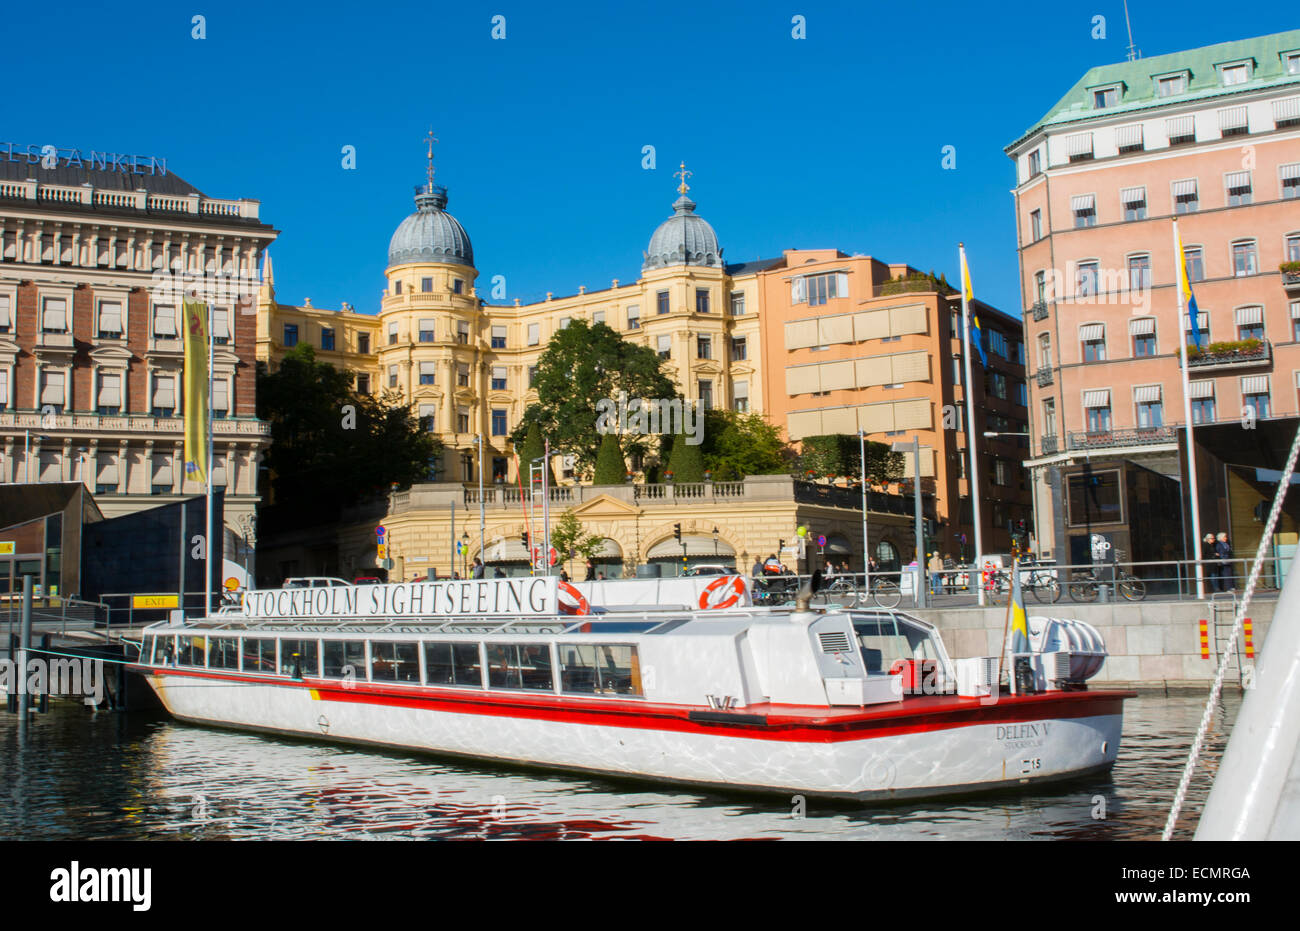 Stockholm Sweden beautiful city downtown center skyline from water with boats and buildings from cruise boat Stock Photo